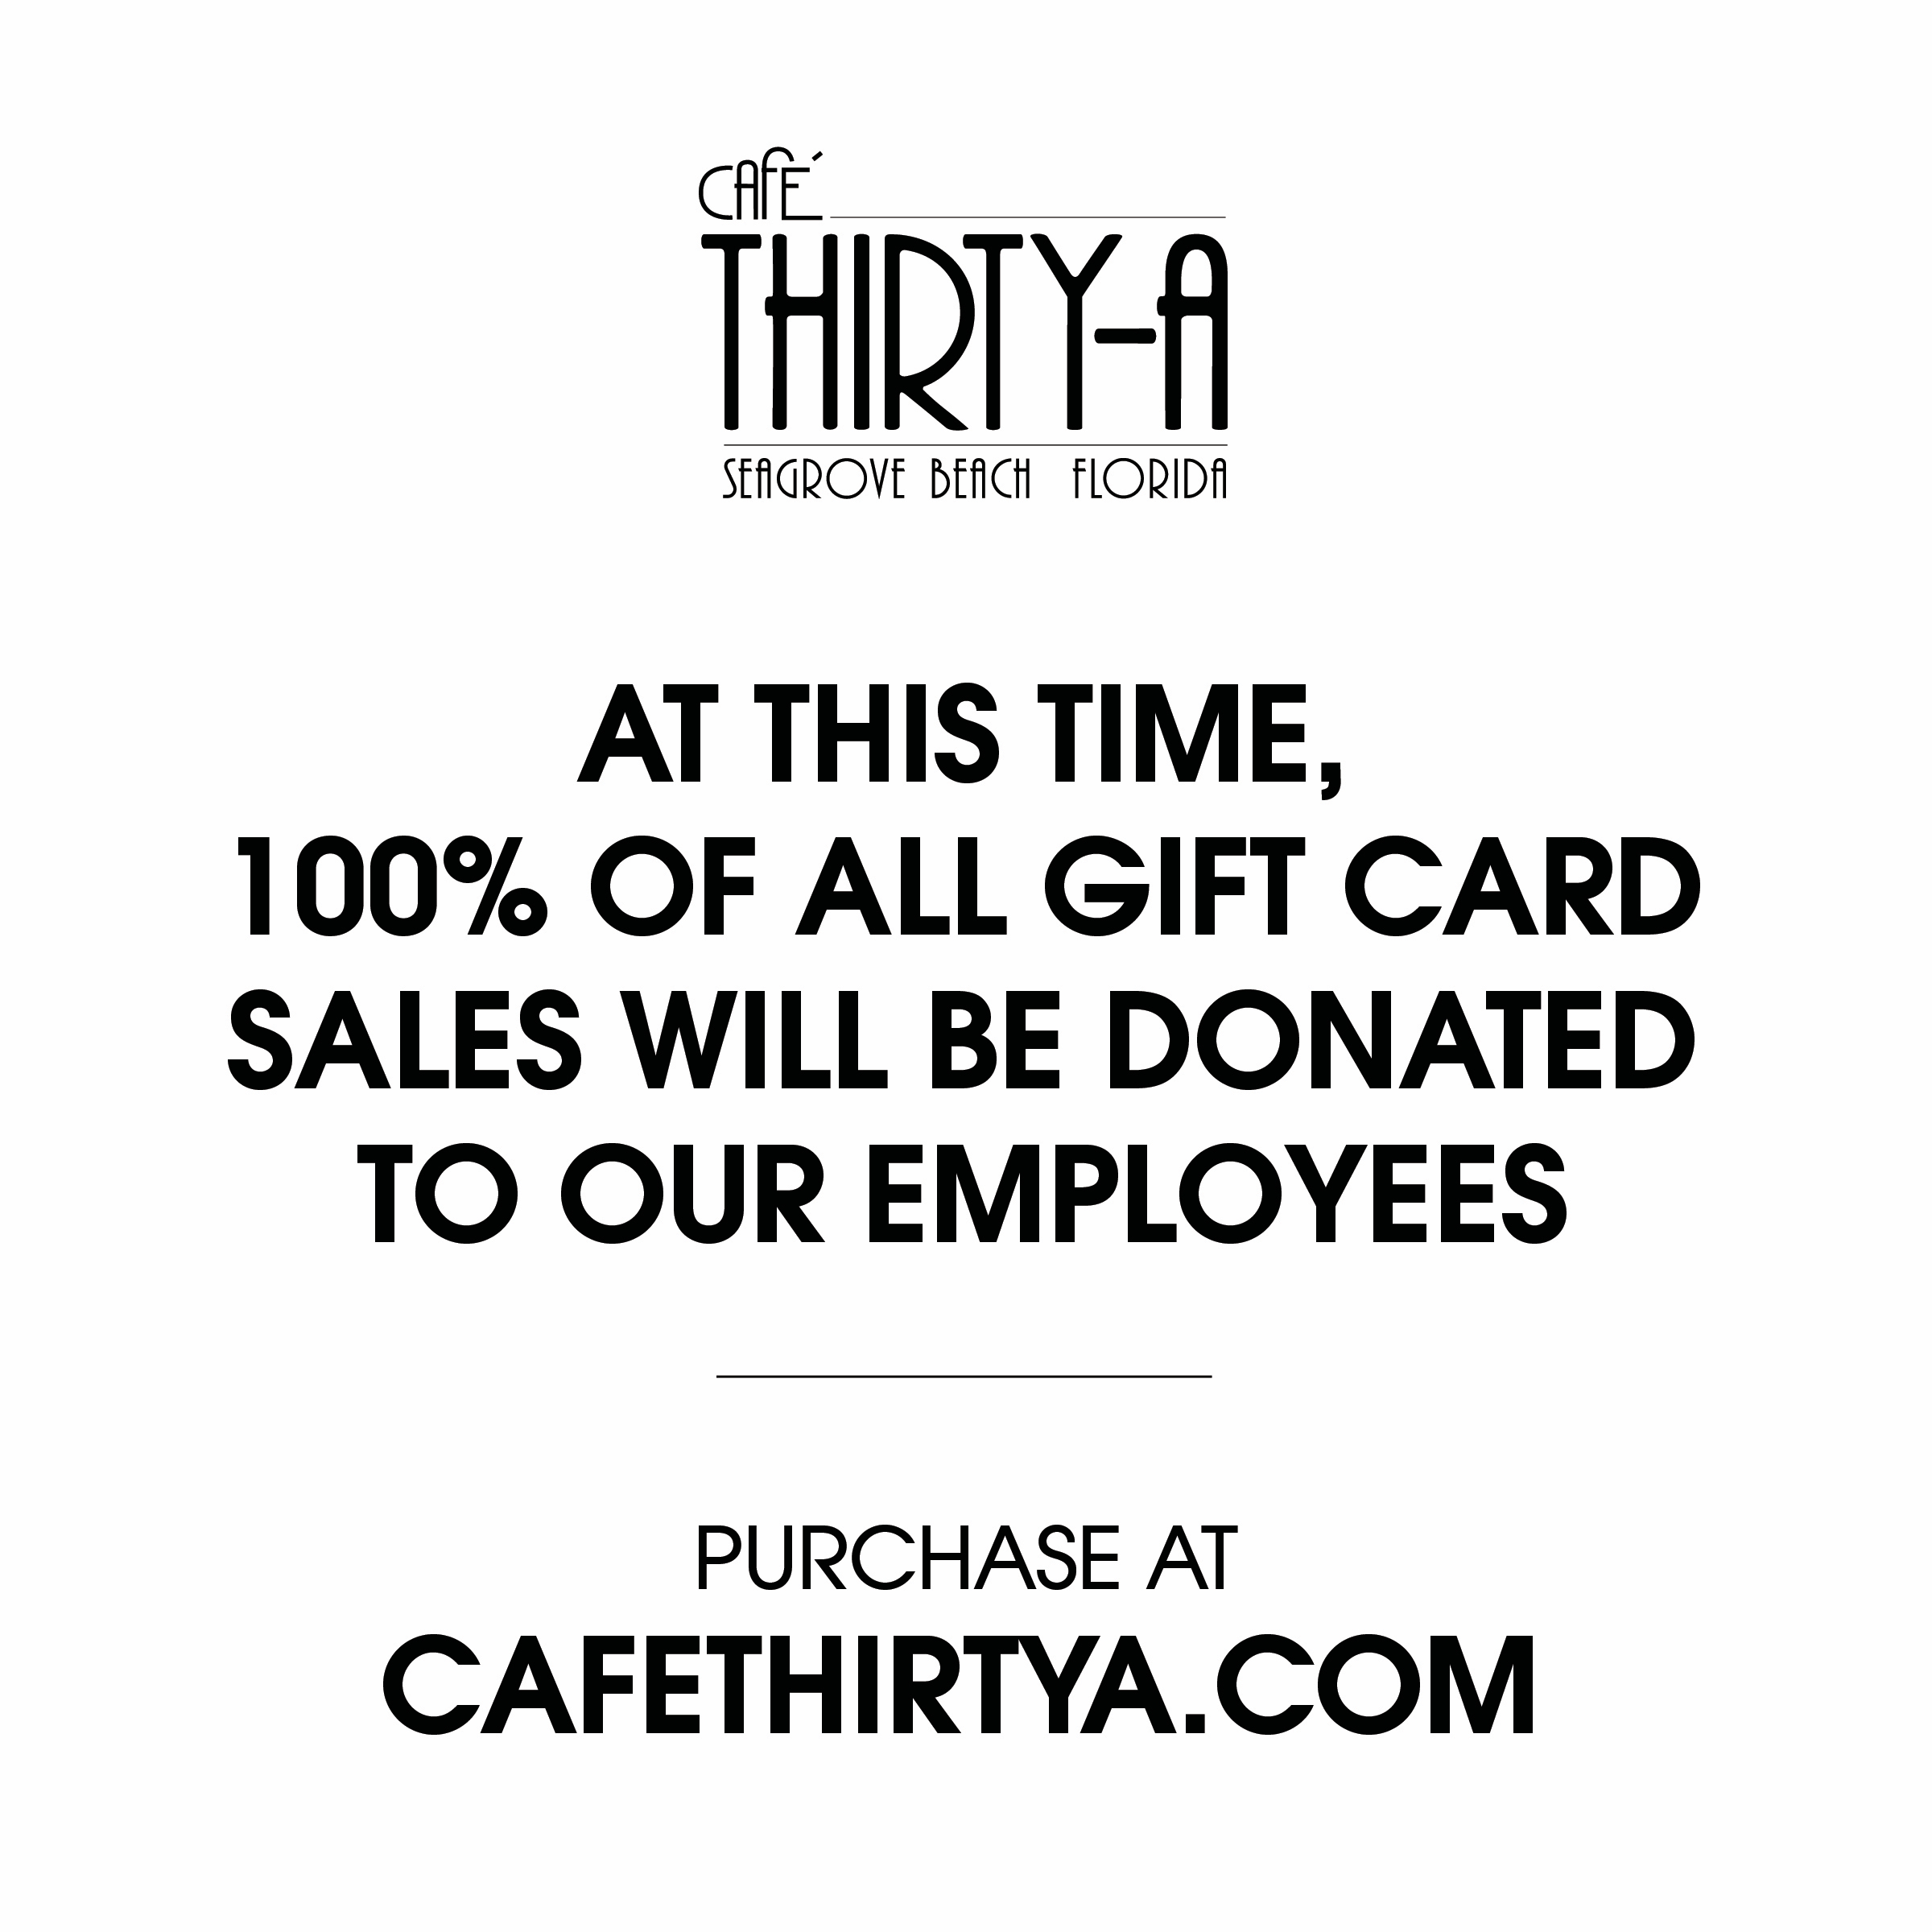 Cafe Thirty-A Gift Cards Drive to Help Employees Due to COVID-19